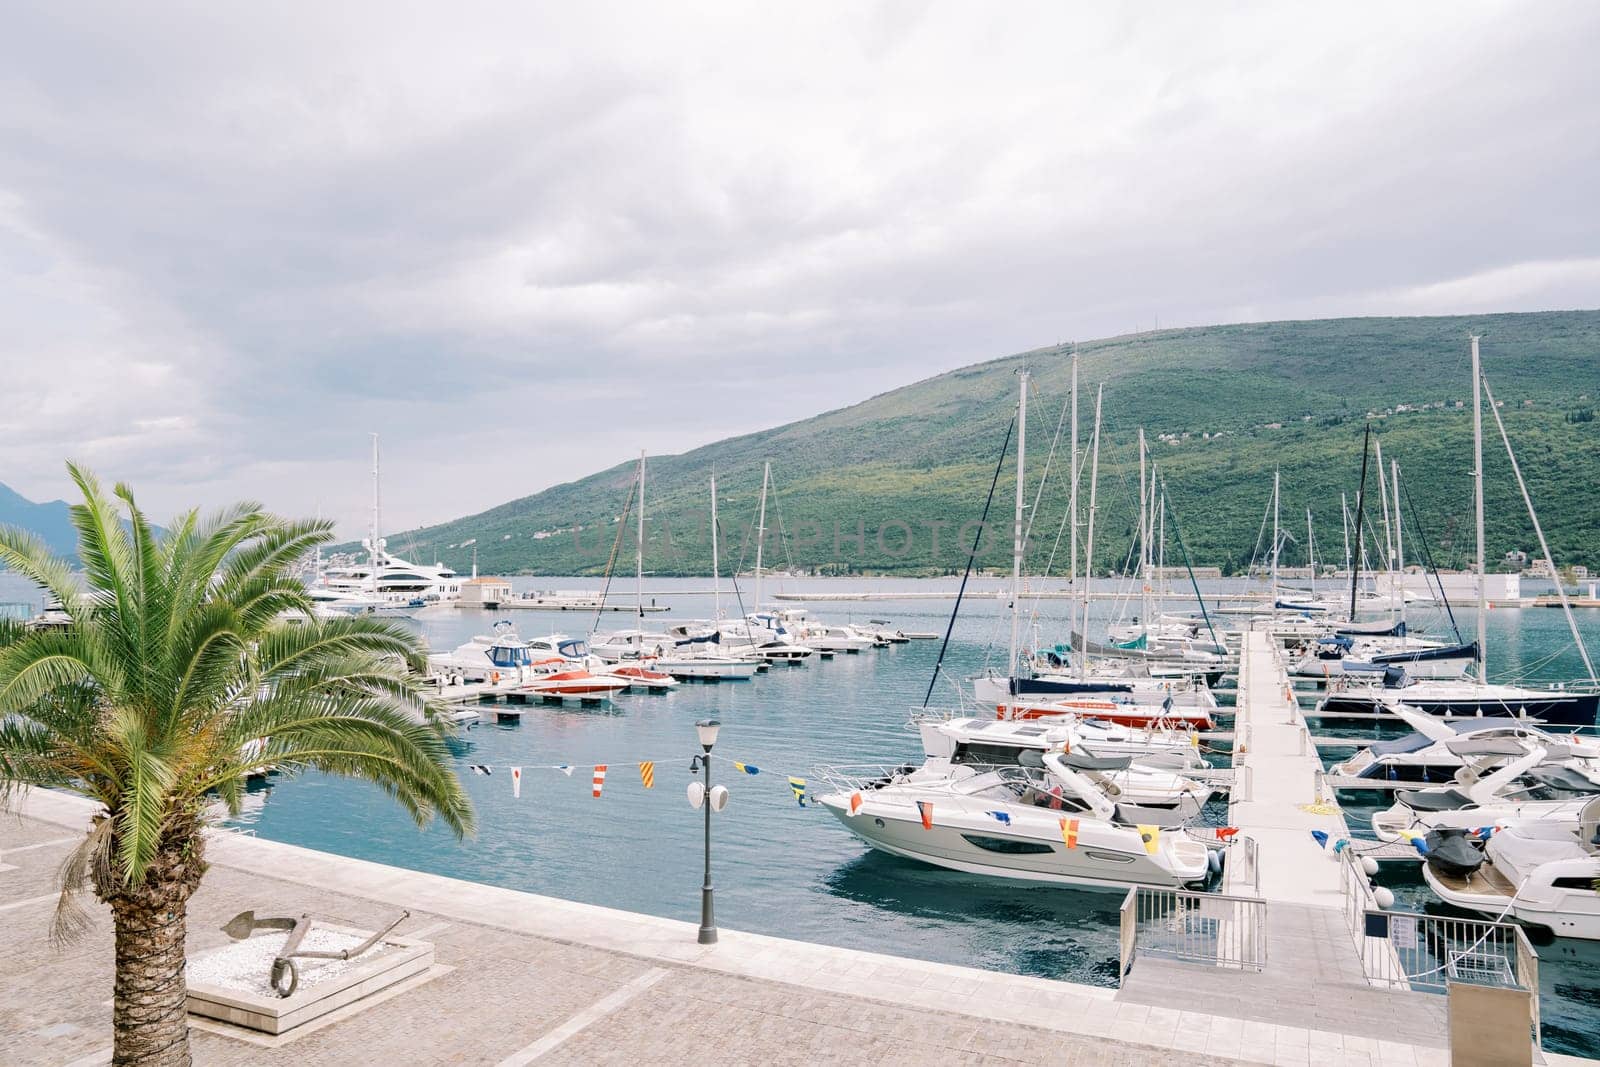 Yachts stand in rows along the piers of a luxurious marina against the backdrop of green mountains by Nadtochiy